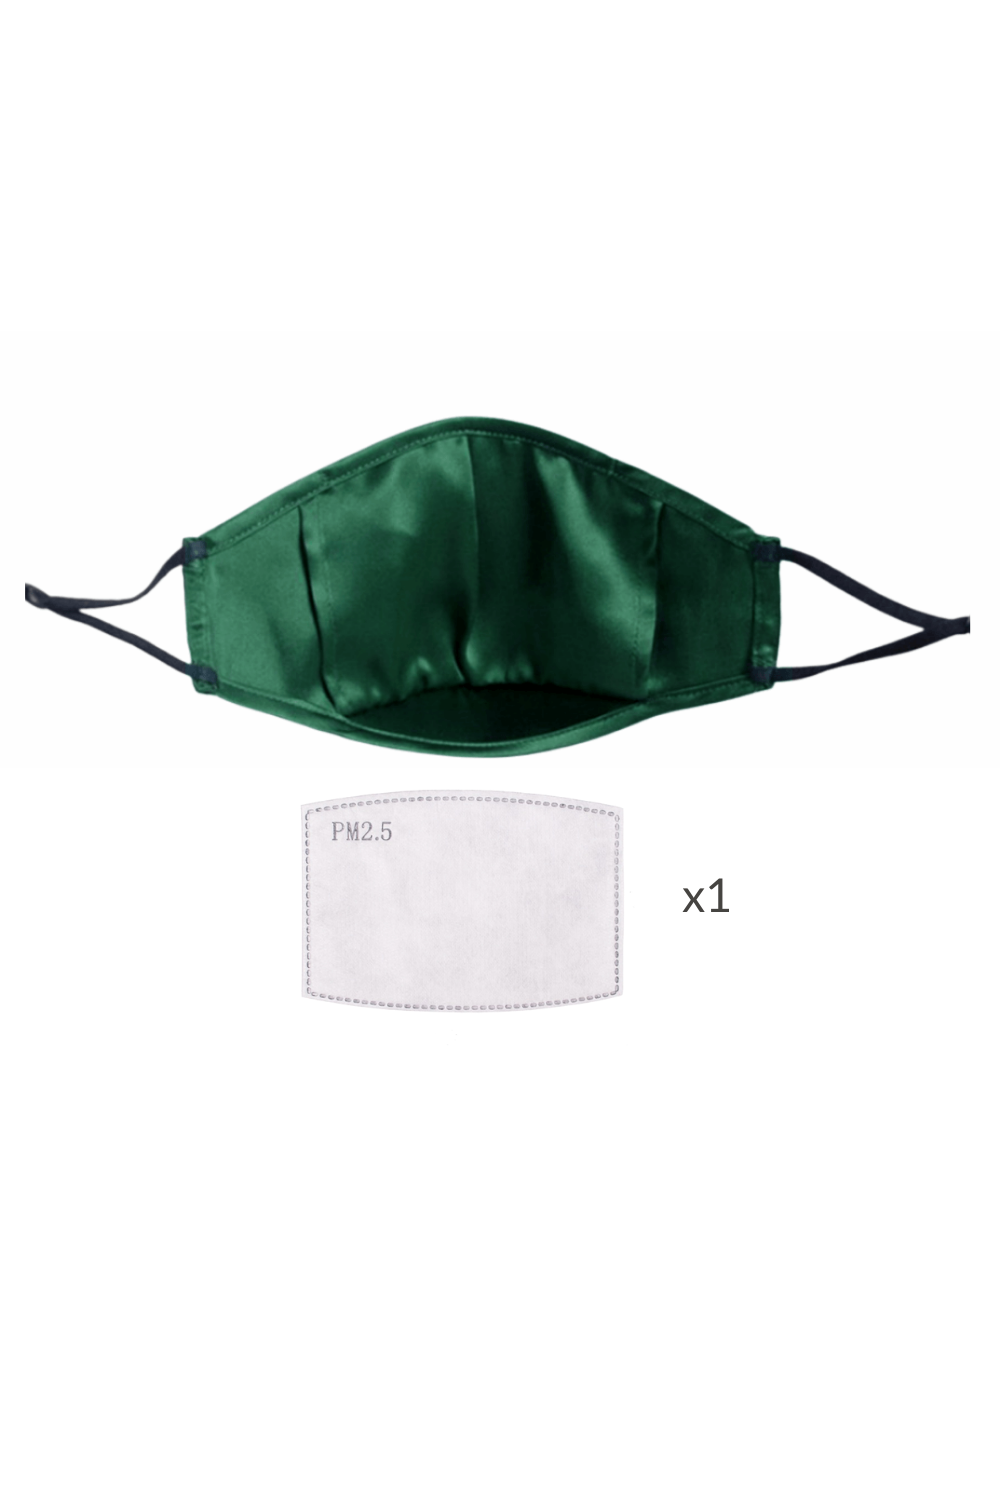 ULTRA Silk Face Mask - Emerald (with Filter Pocket and Nose Wire) - BASK™